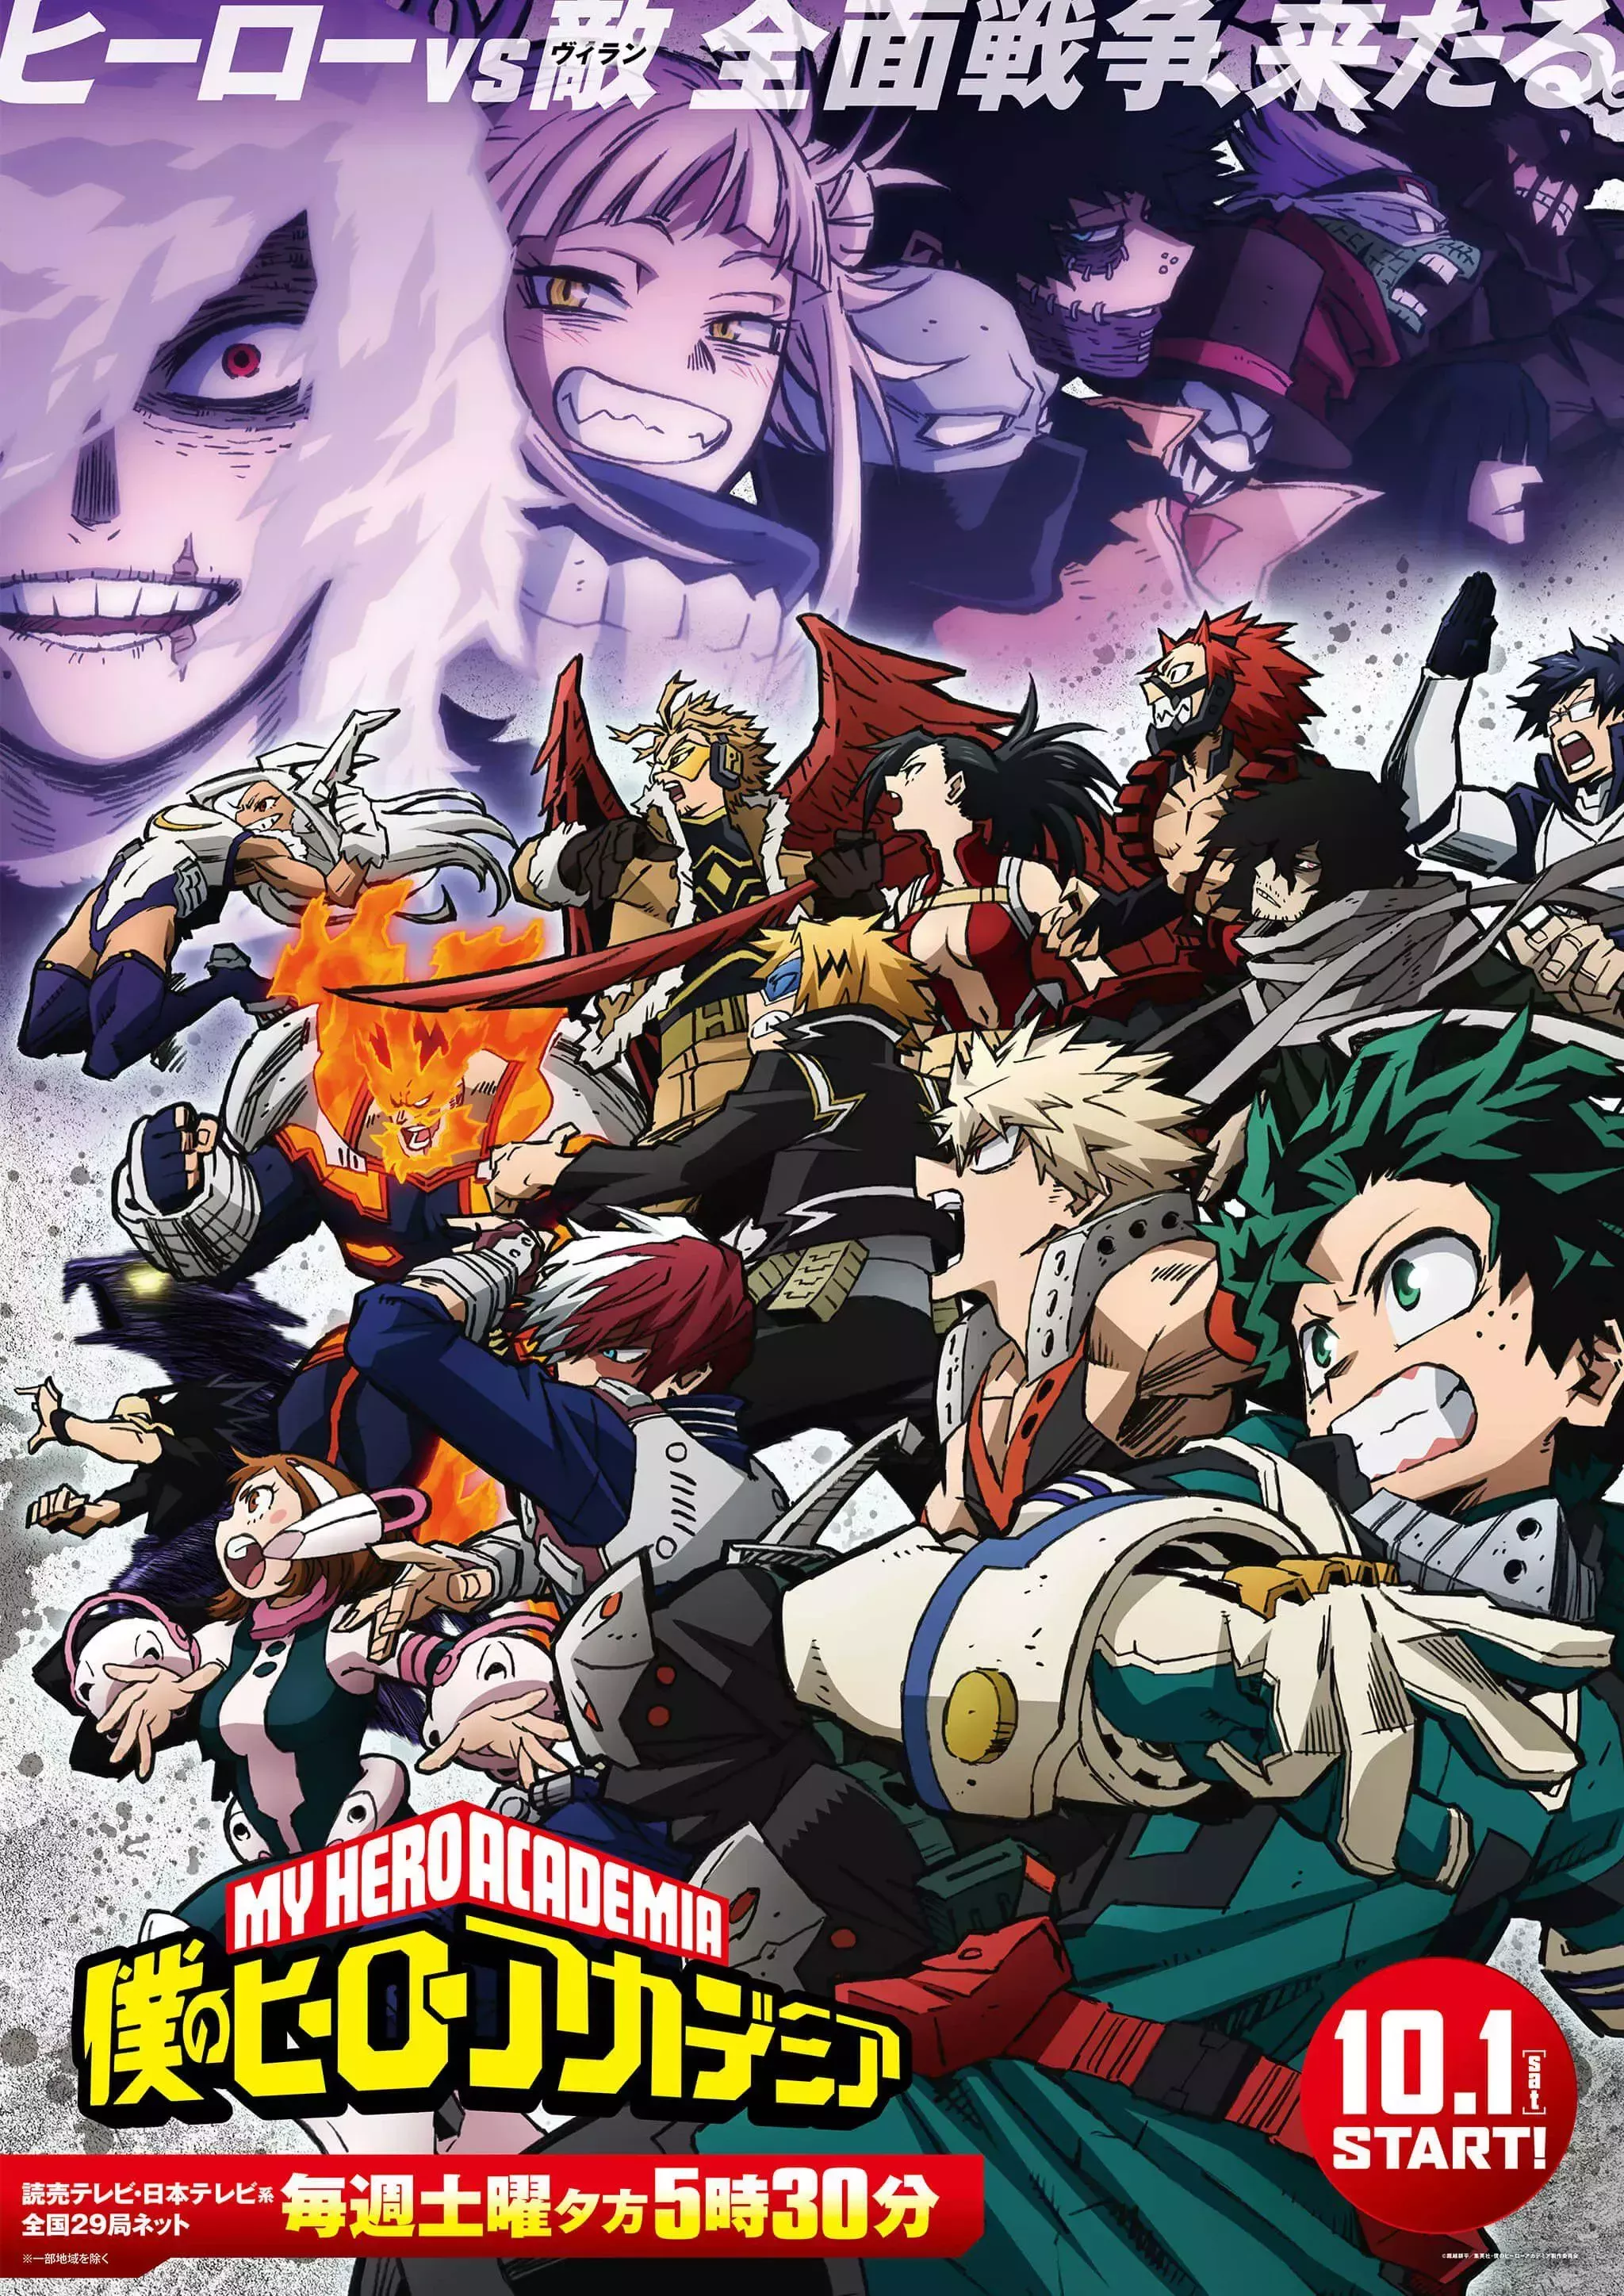 Class 2-A leap into battle with the League of Villains on the MHA Anime Poster